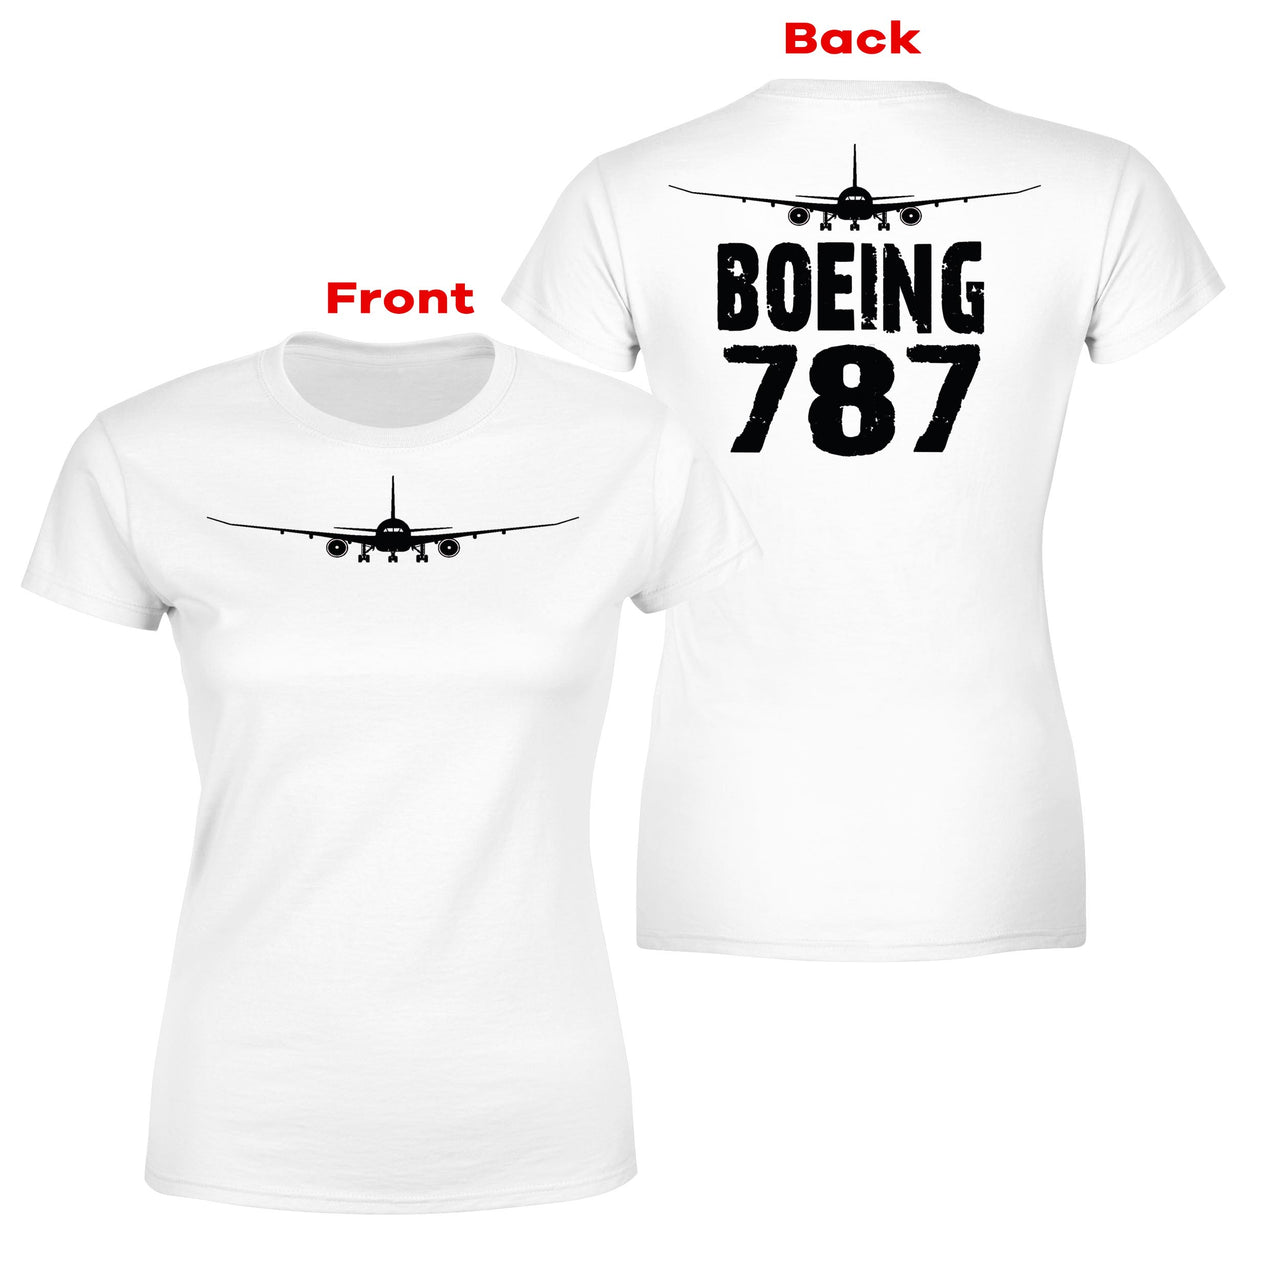 Boeing 787 & Plane Designed Double-Side T-Shirts